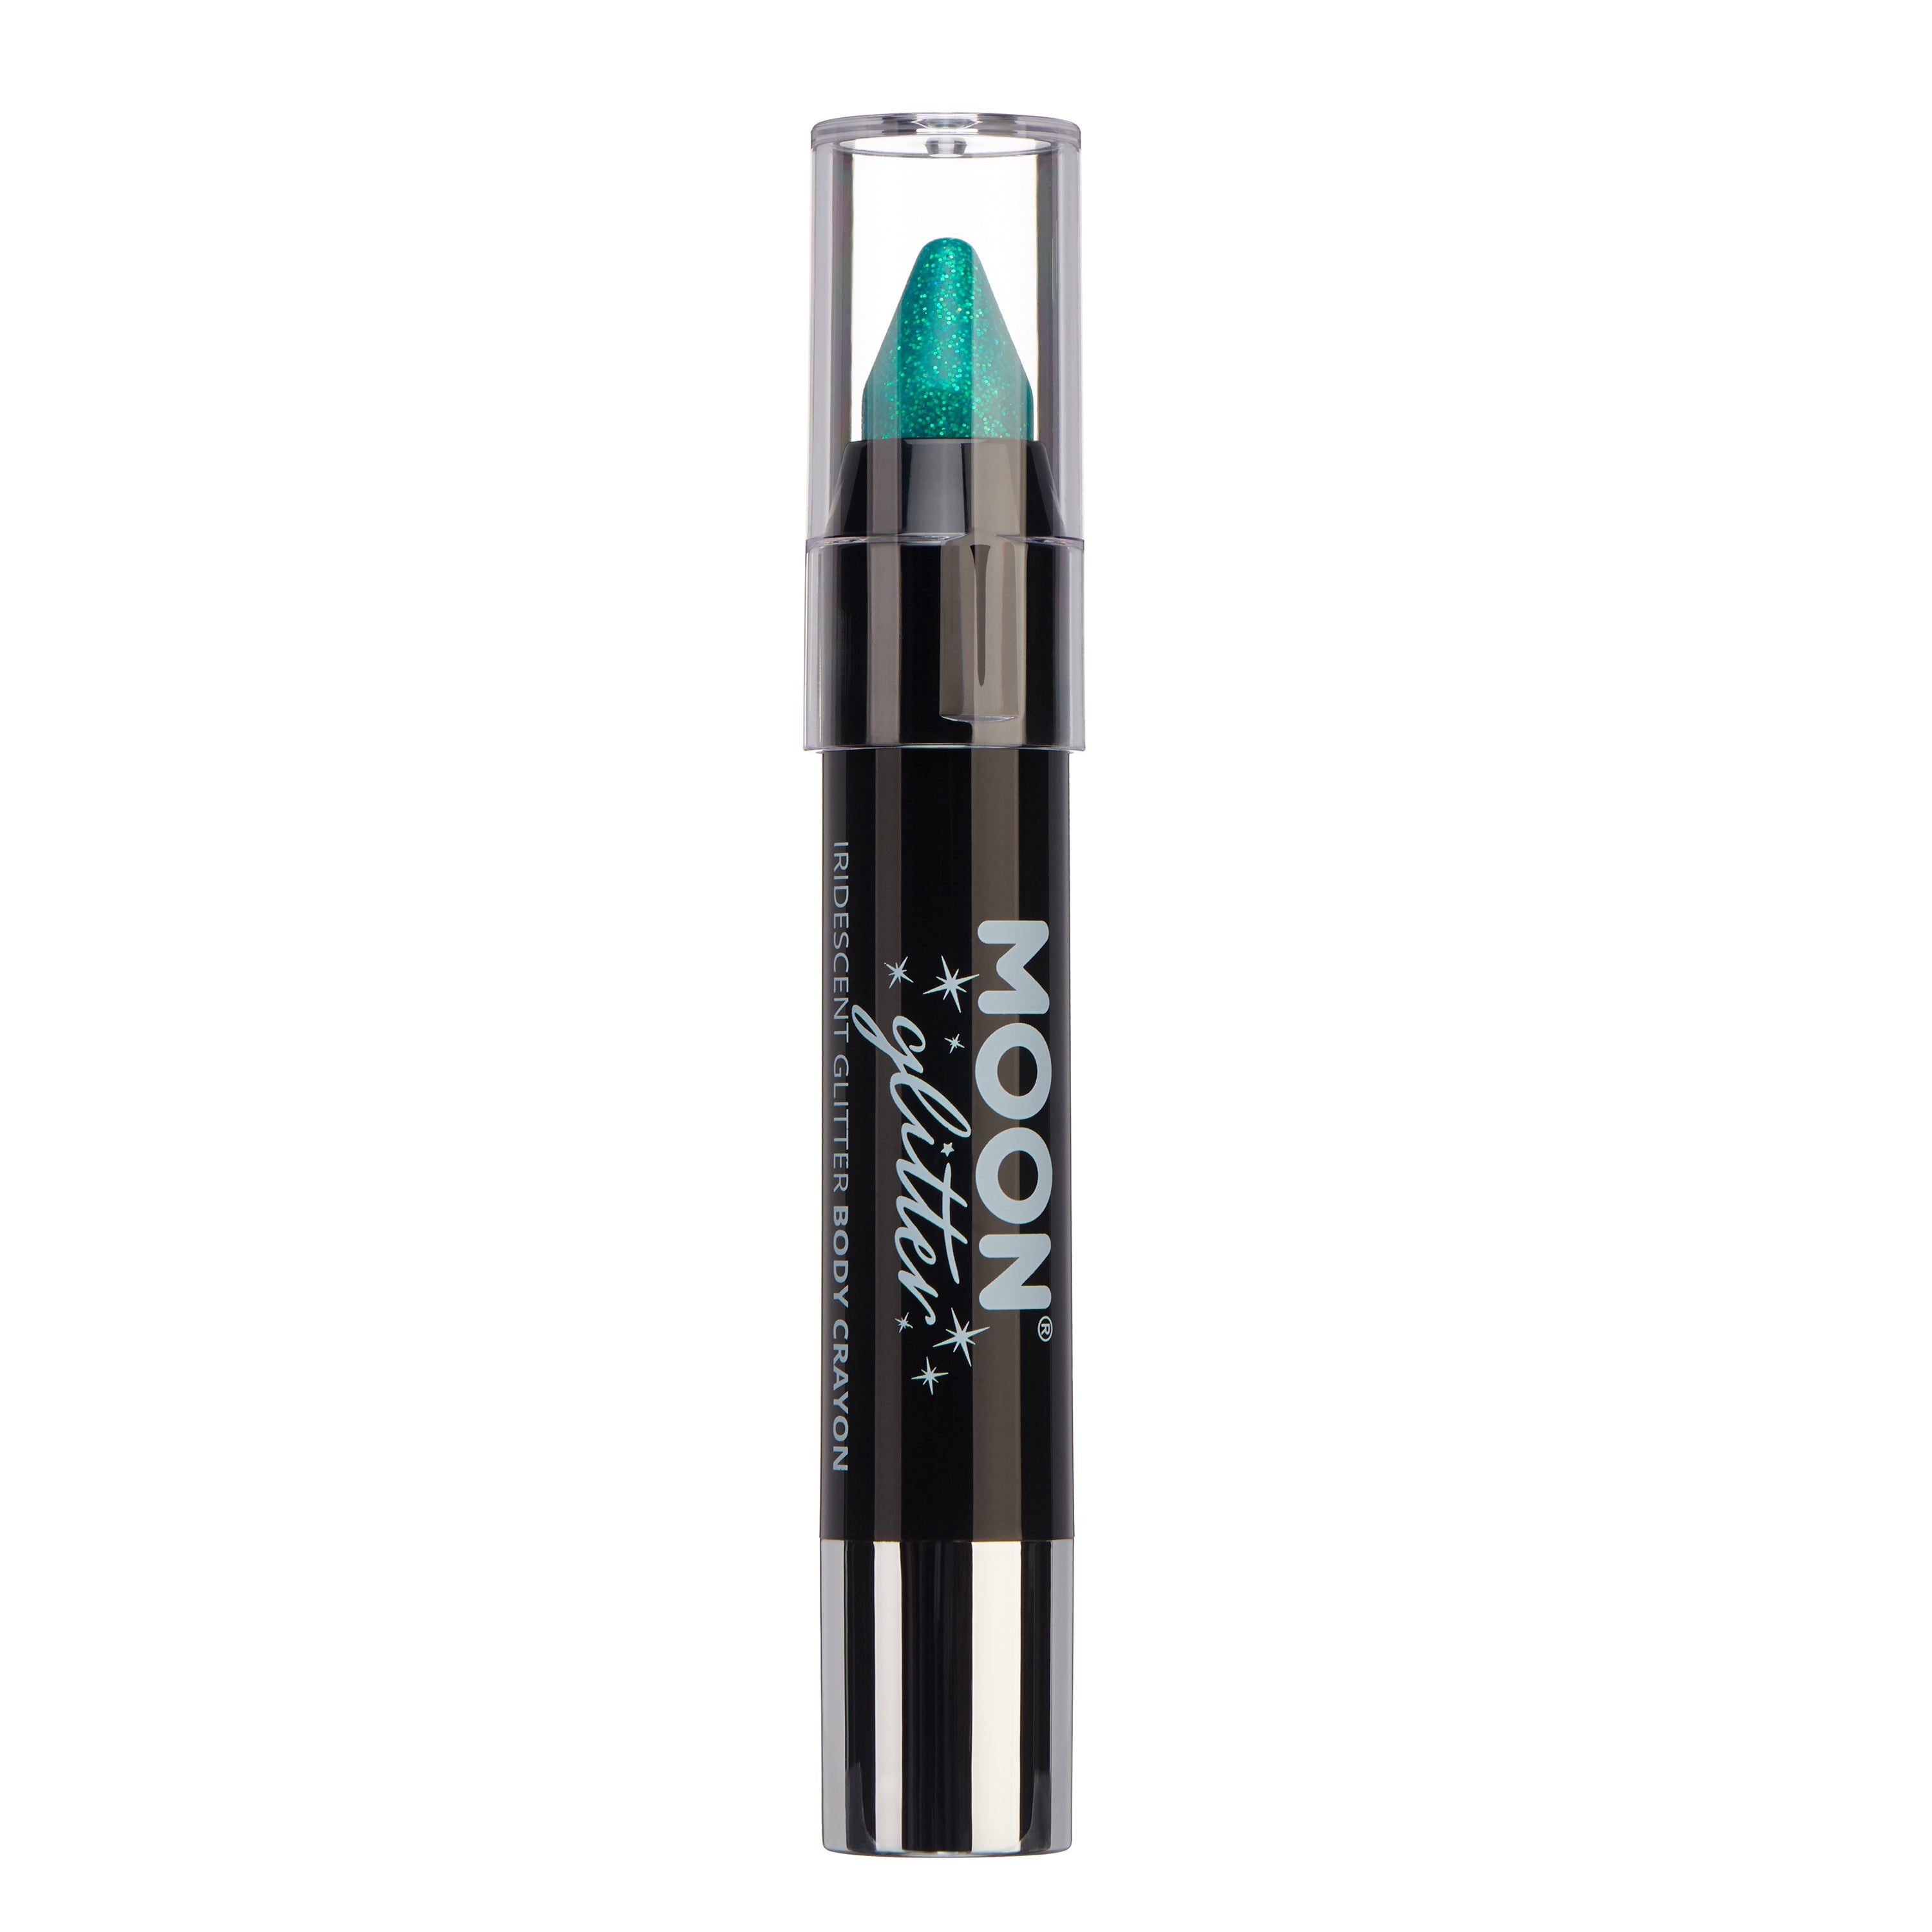 Green - Iridescent Glitter Face & Body Crayon. Cosmetically certified, FDA & Health Canada compliant and cruelty free.